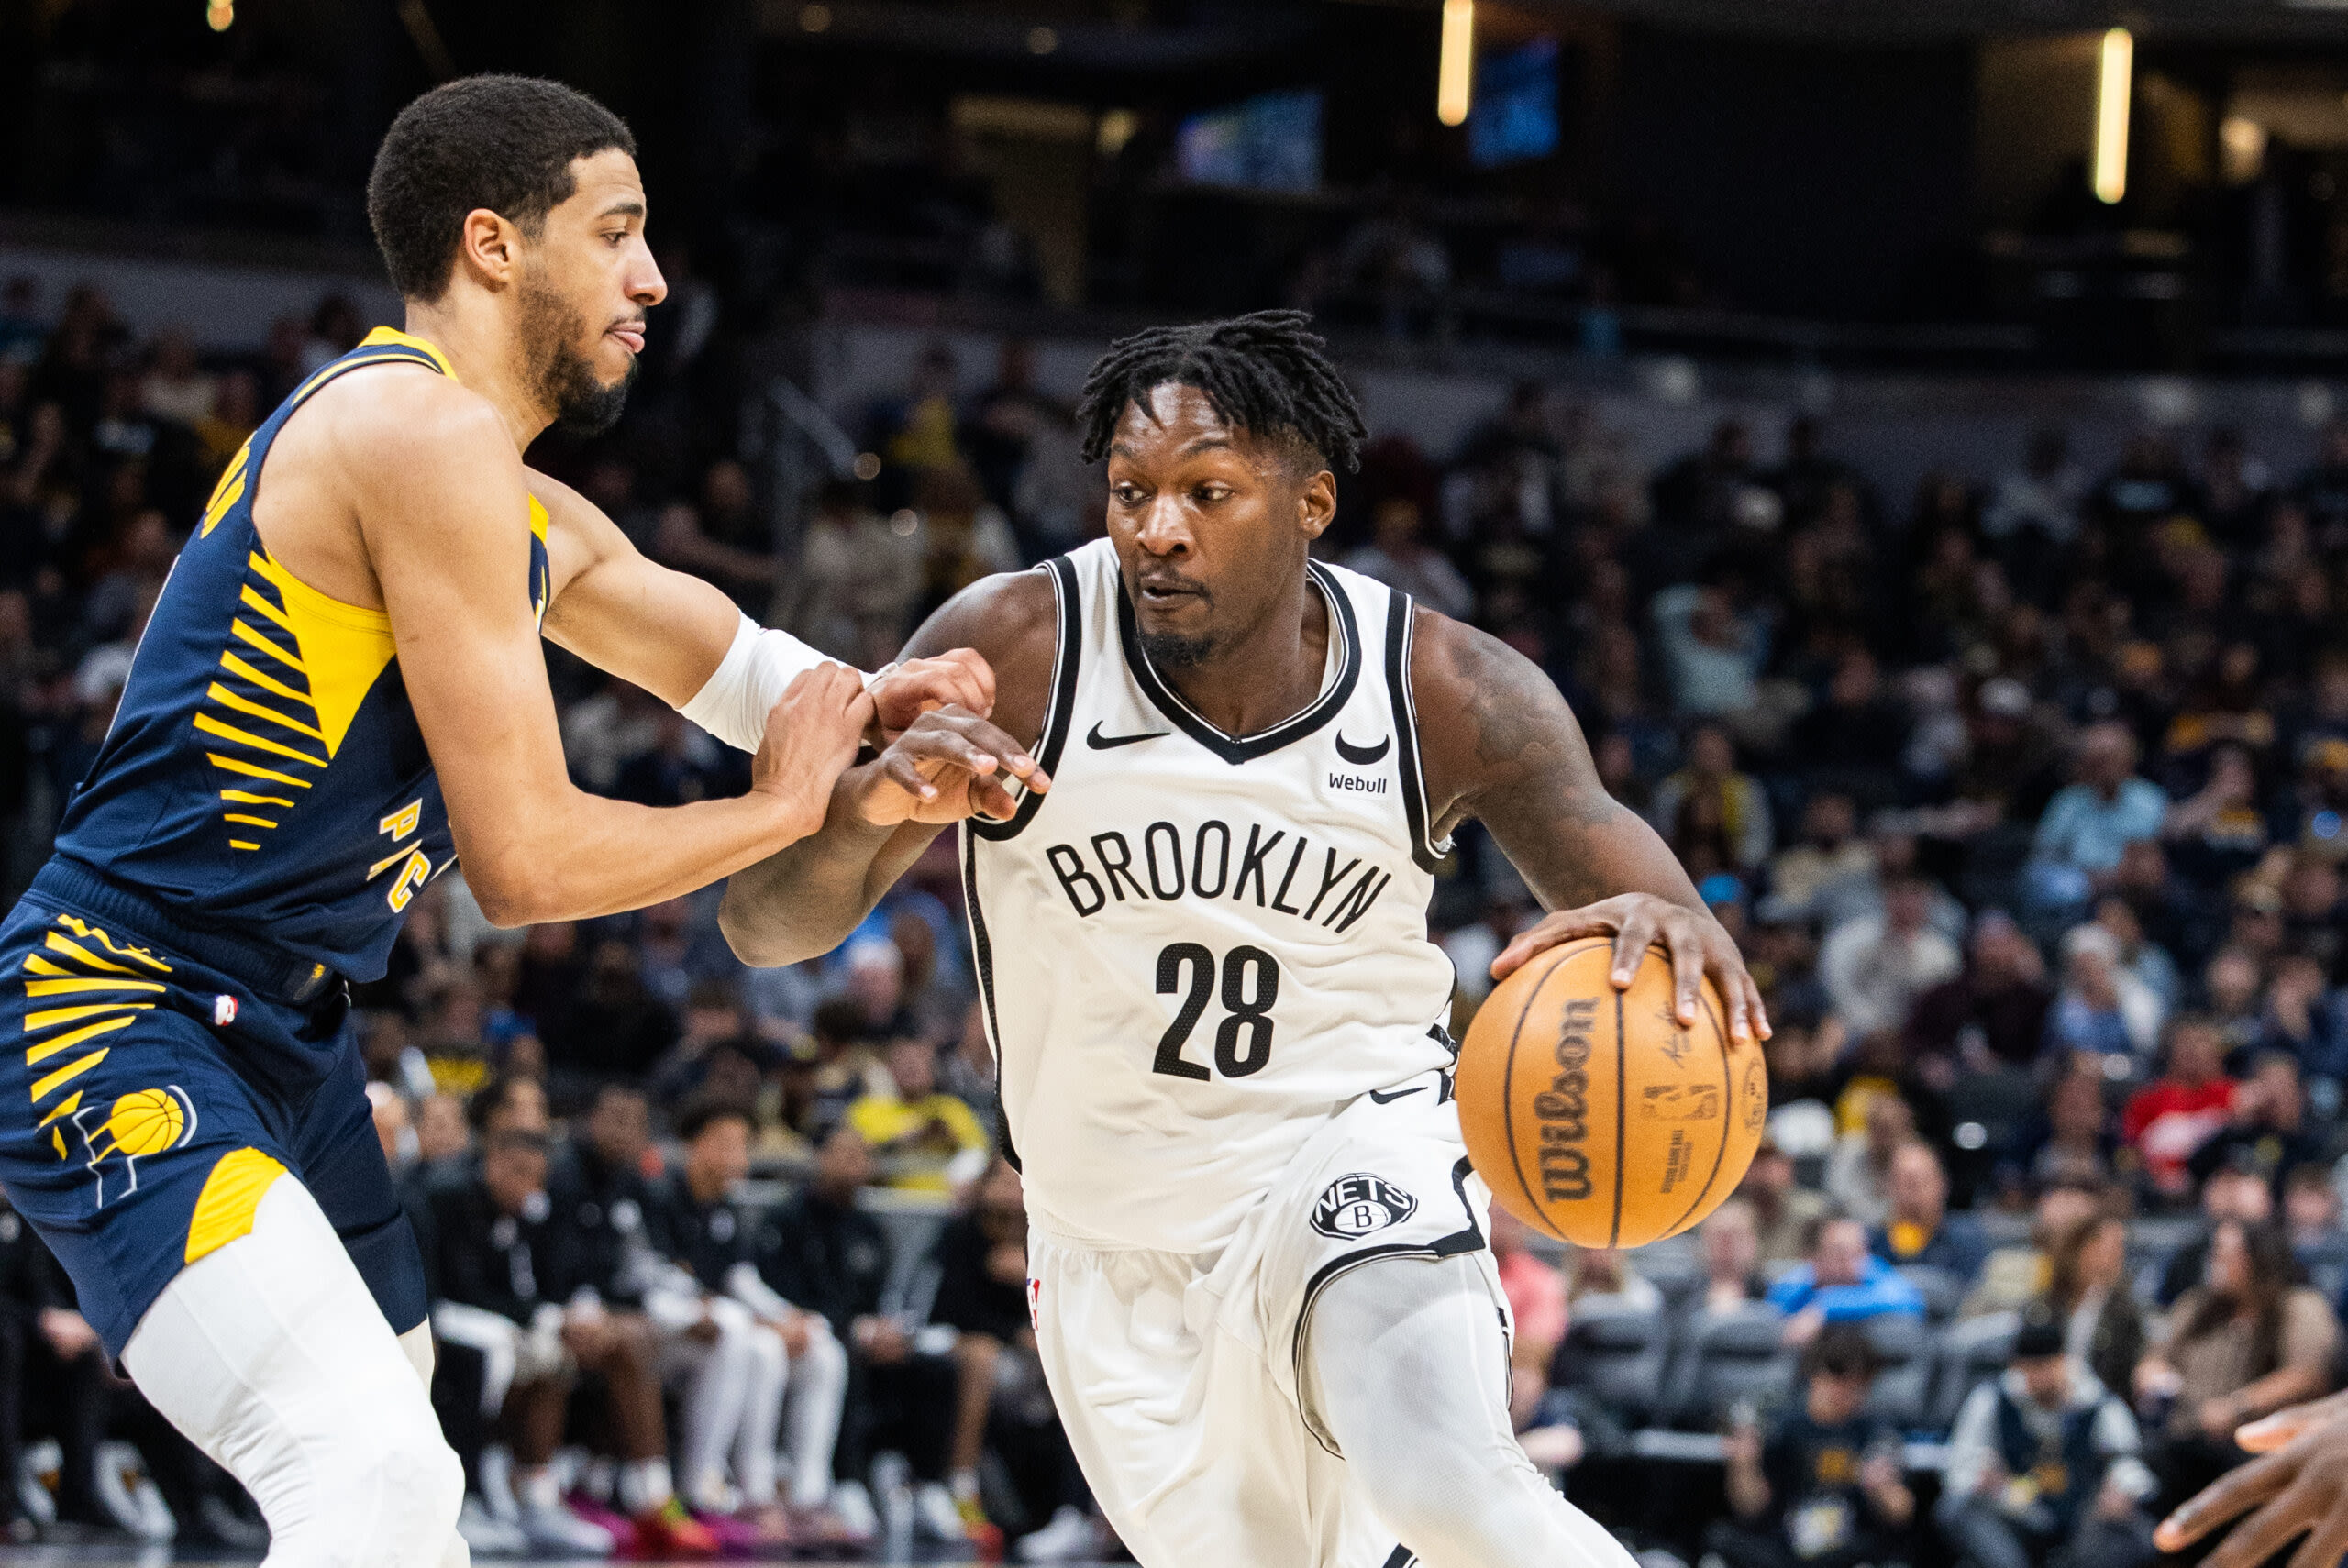 Report: Nets’ Dorian Finney-Smith could be moved sometime soon